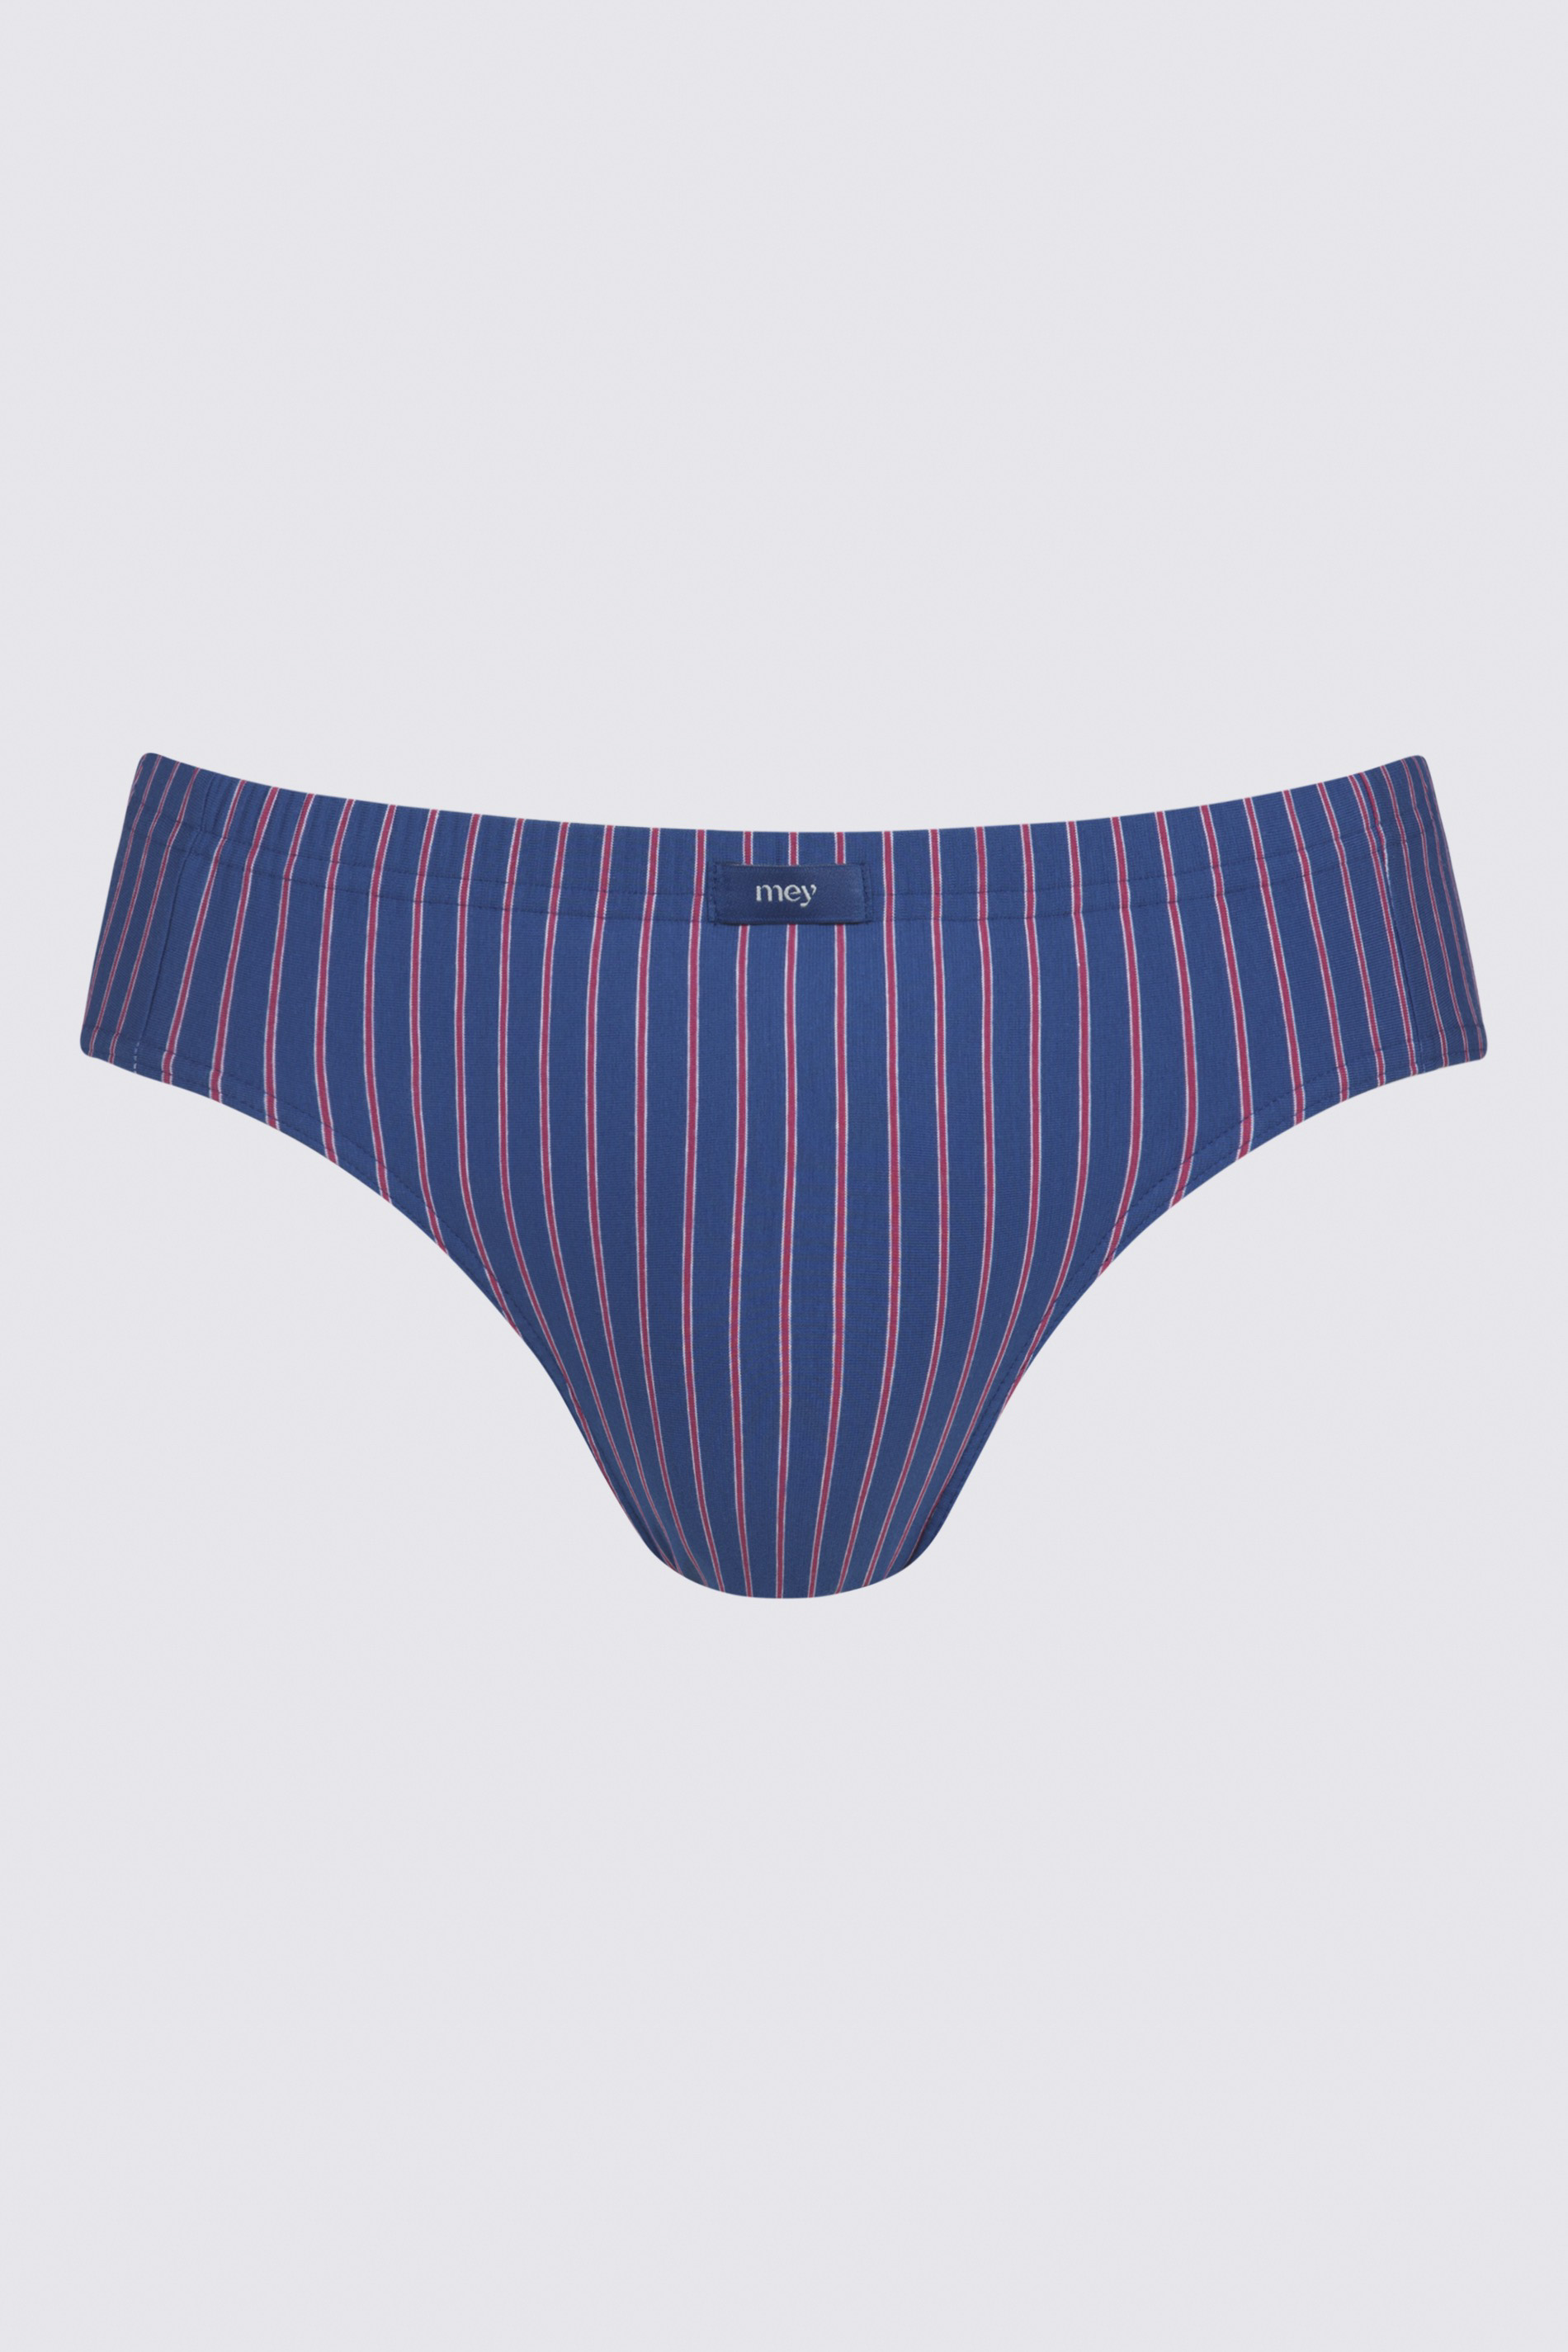 Jazz-pants Serie 3 Col Stripes Uitknippen | mey®